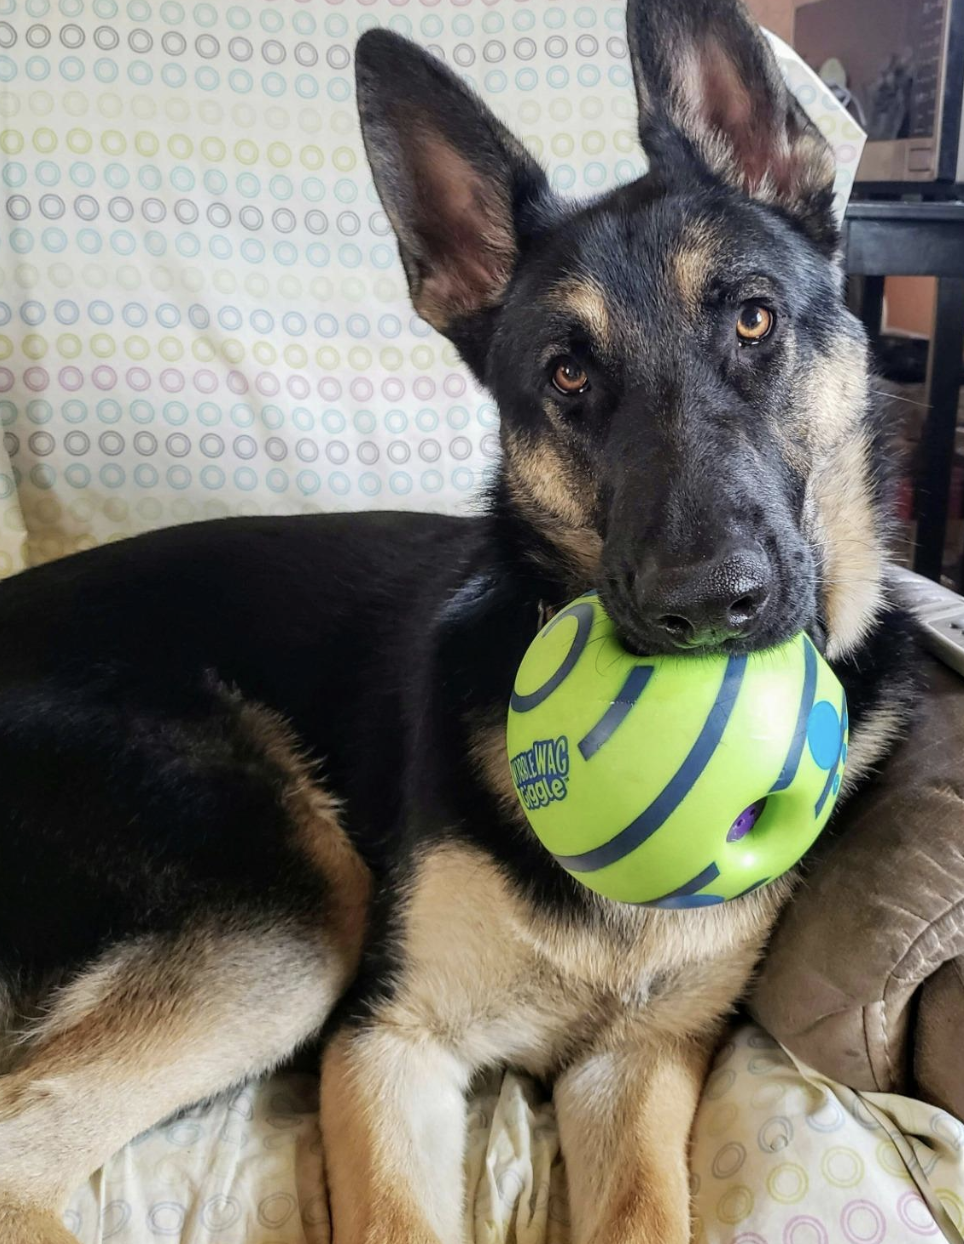 German shepherd with bright green ball in their mouth